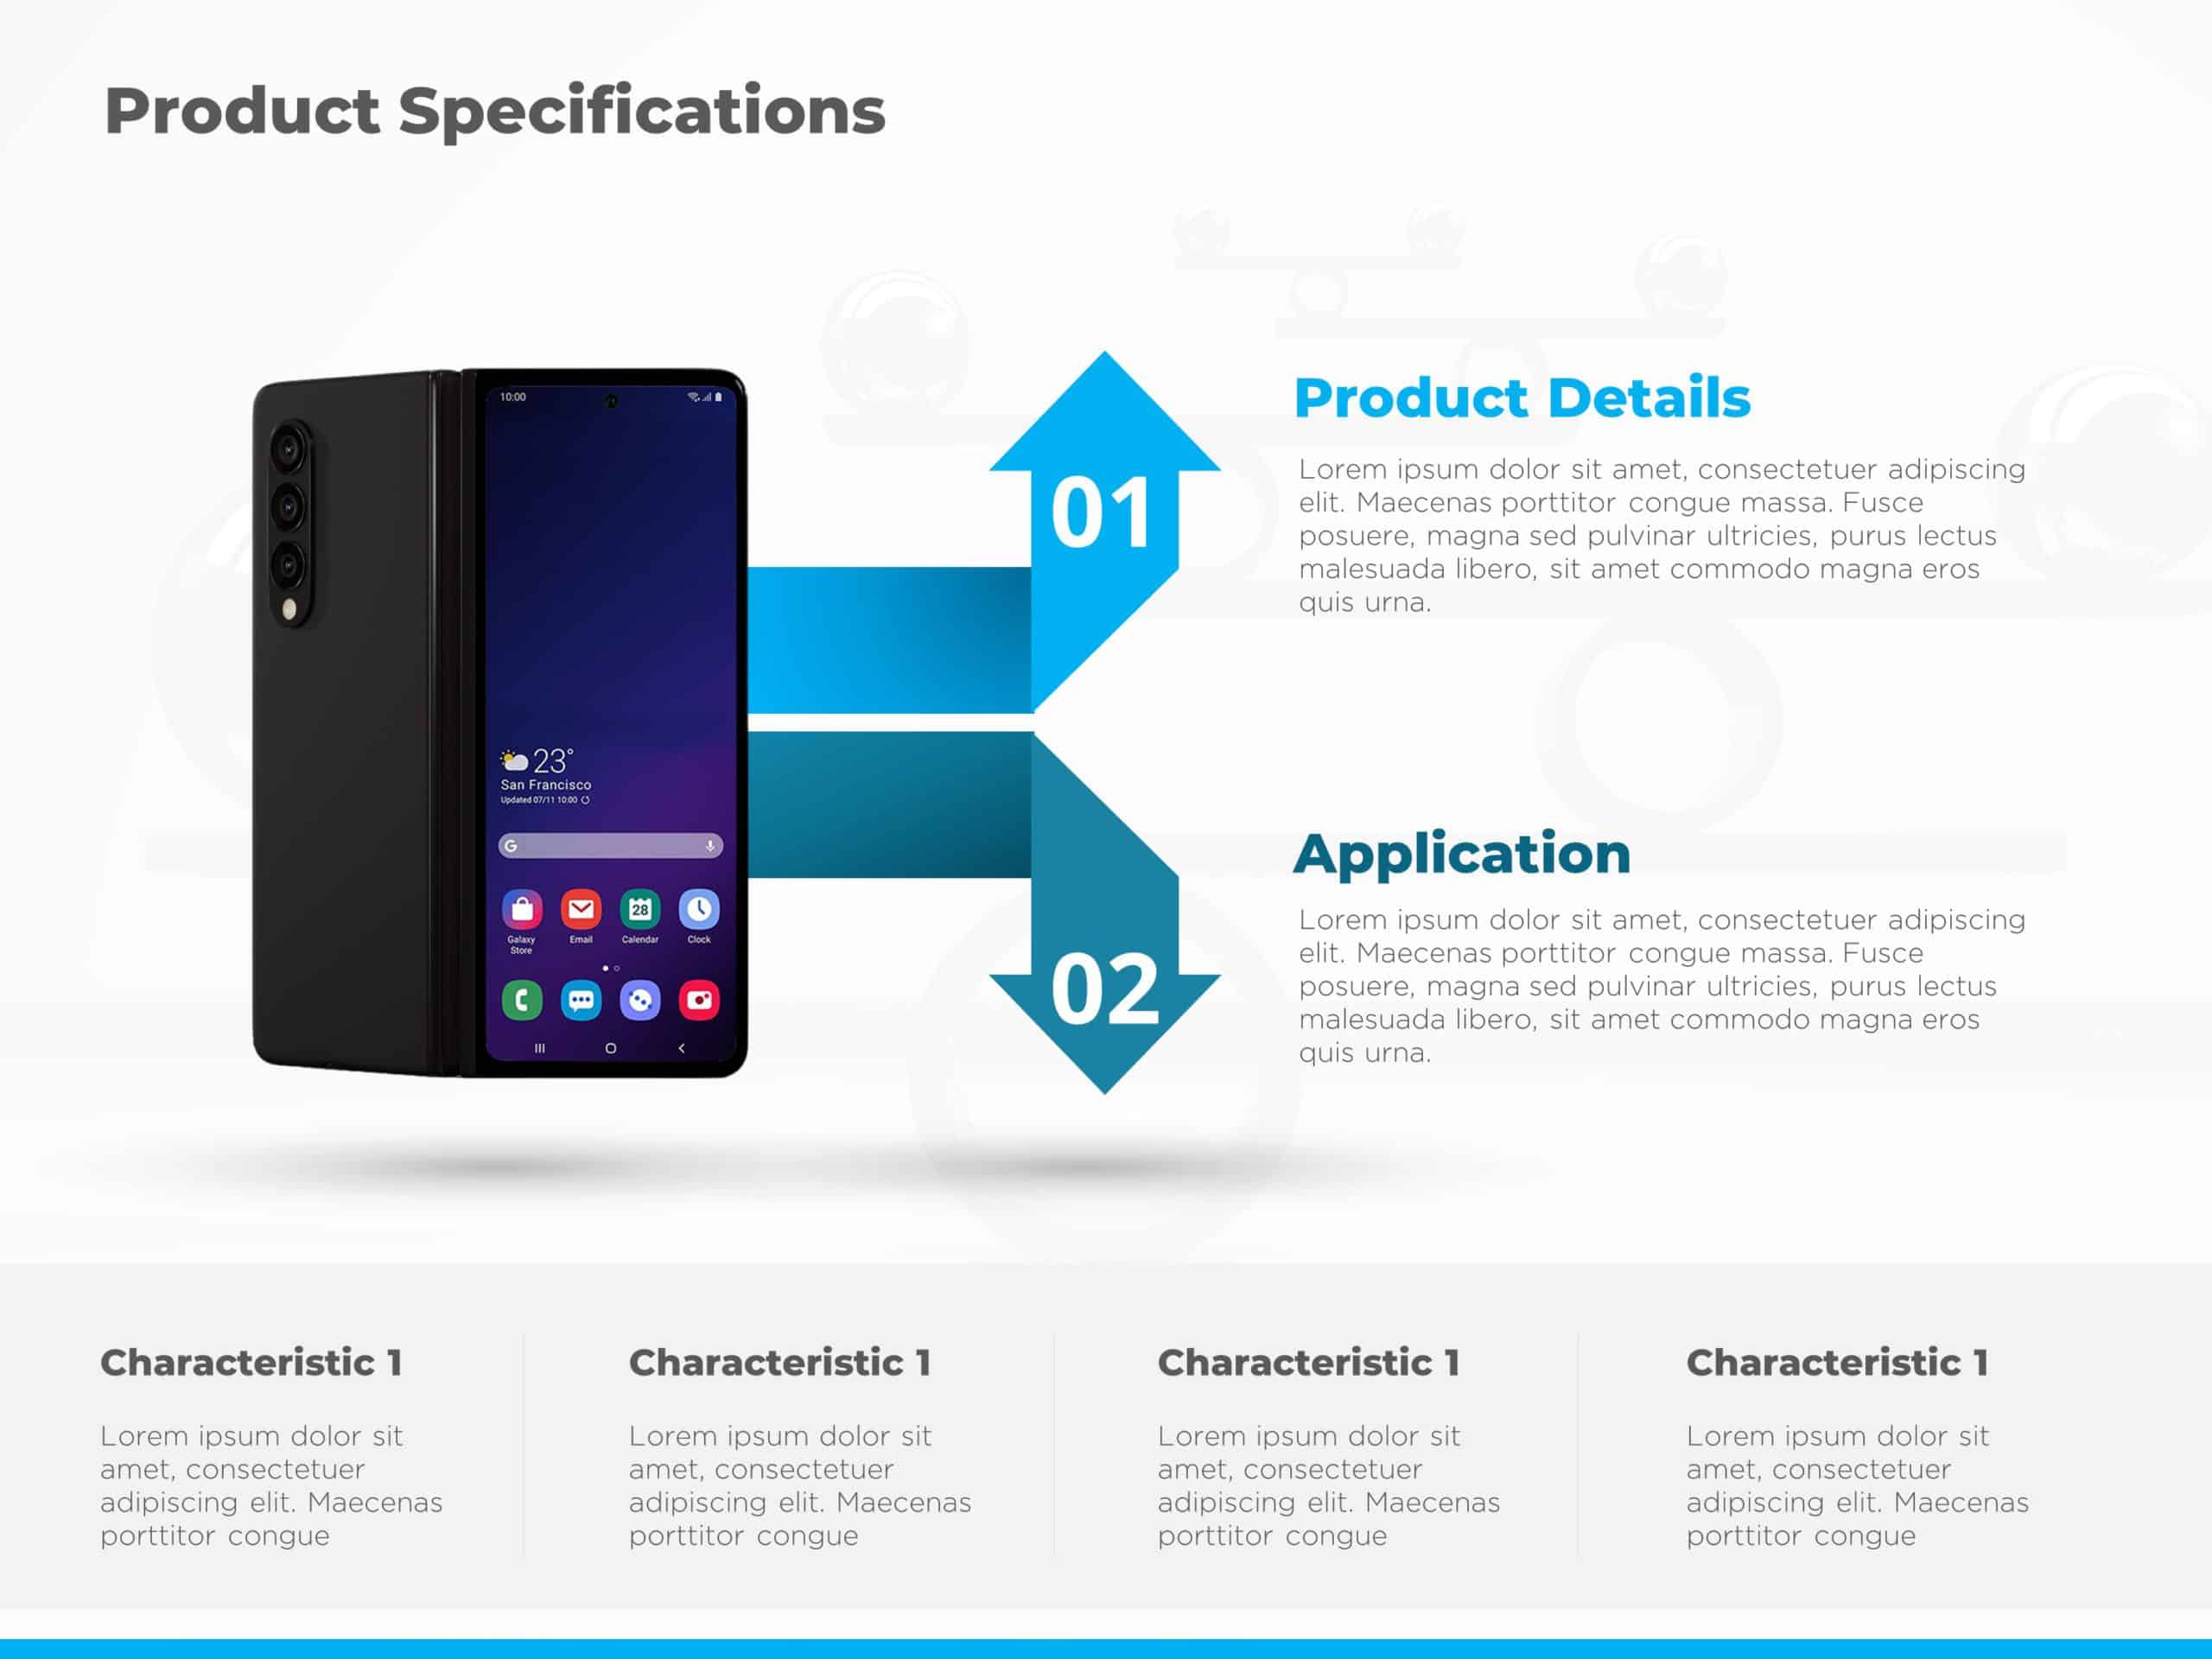 Product Specifications PowerPoint Template